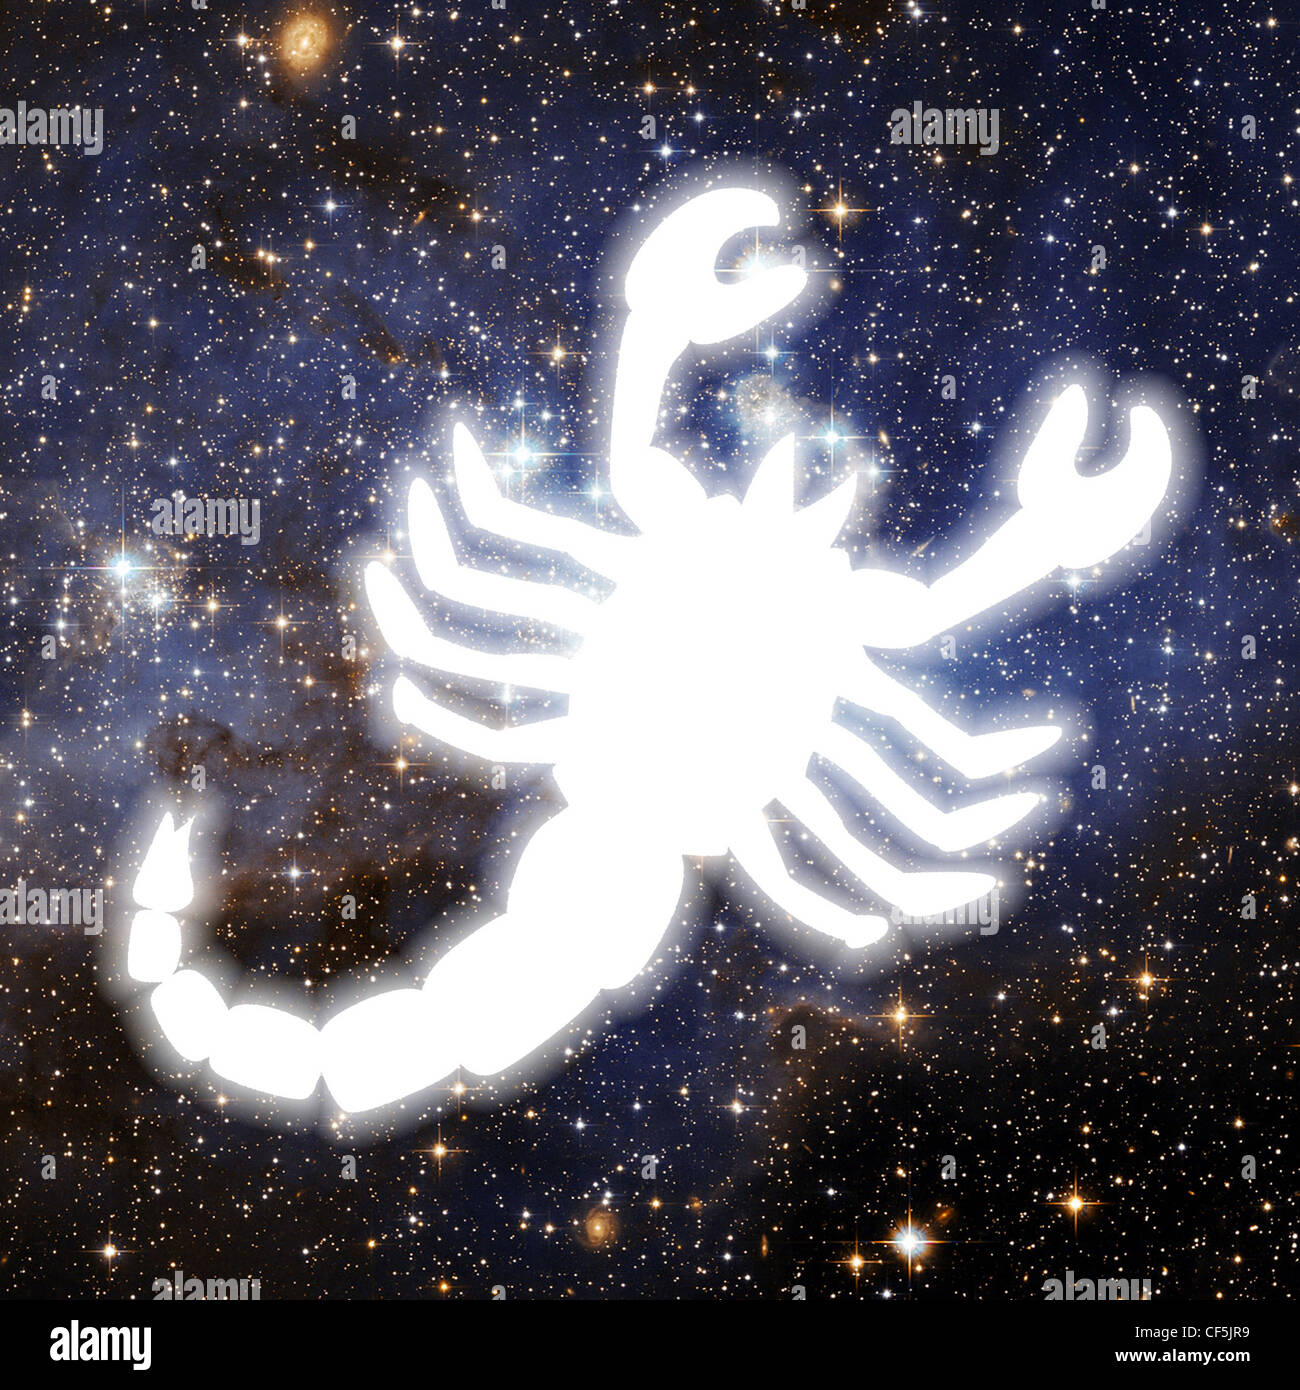 An illustration of a white silhouetted scorpion, set against a background of space filled with stars Stock Photo